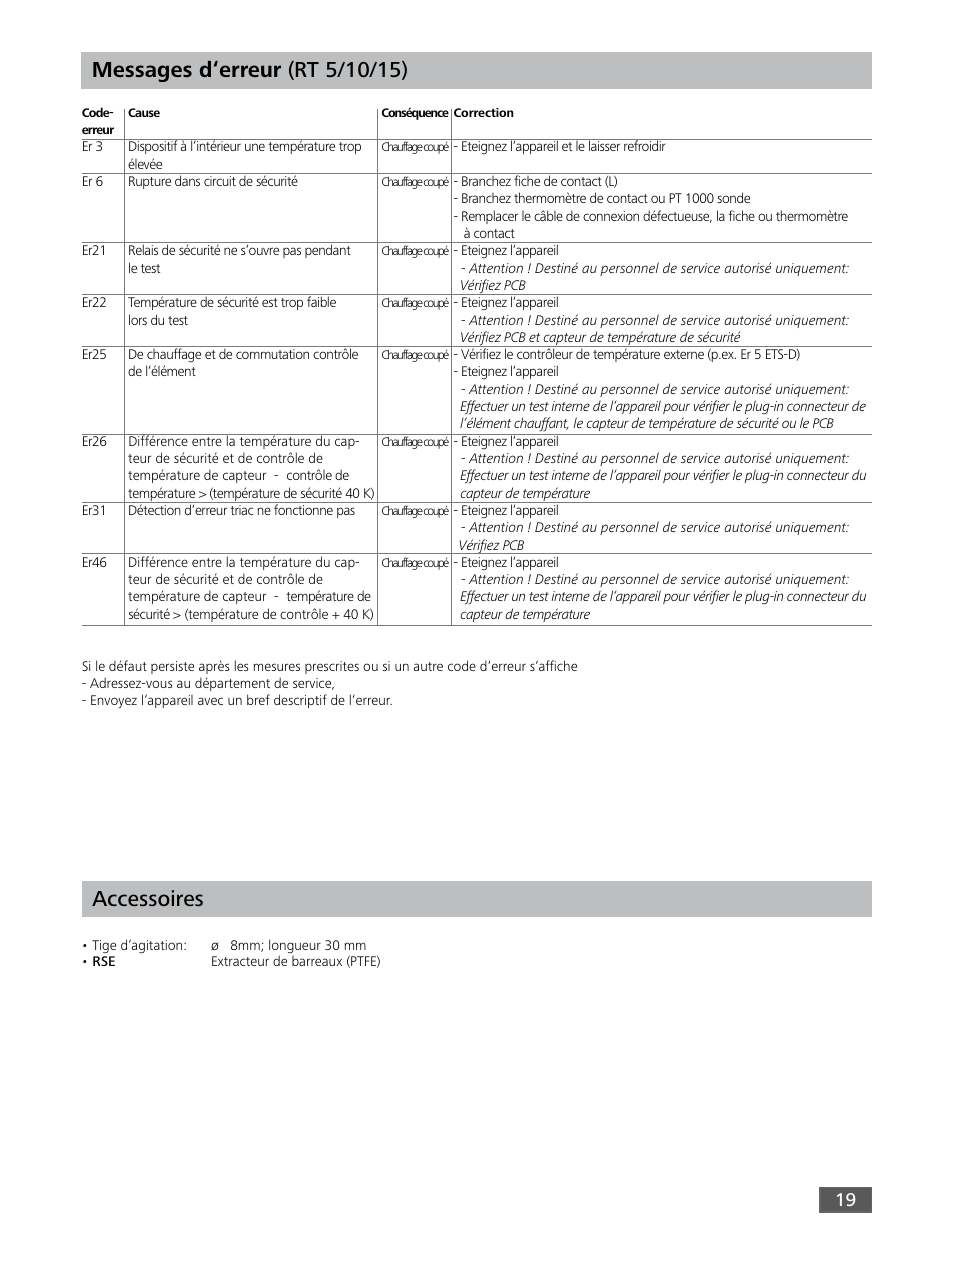 Accessoires | IKA RO 15 User Manual | Page 19 / 40